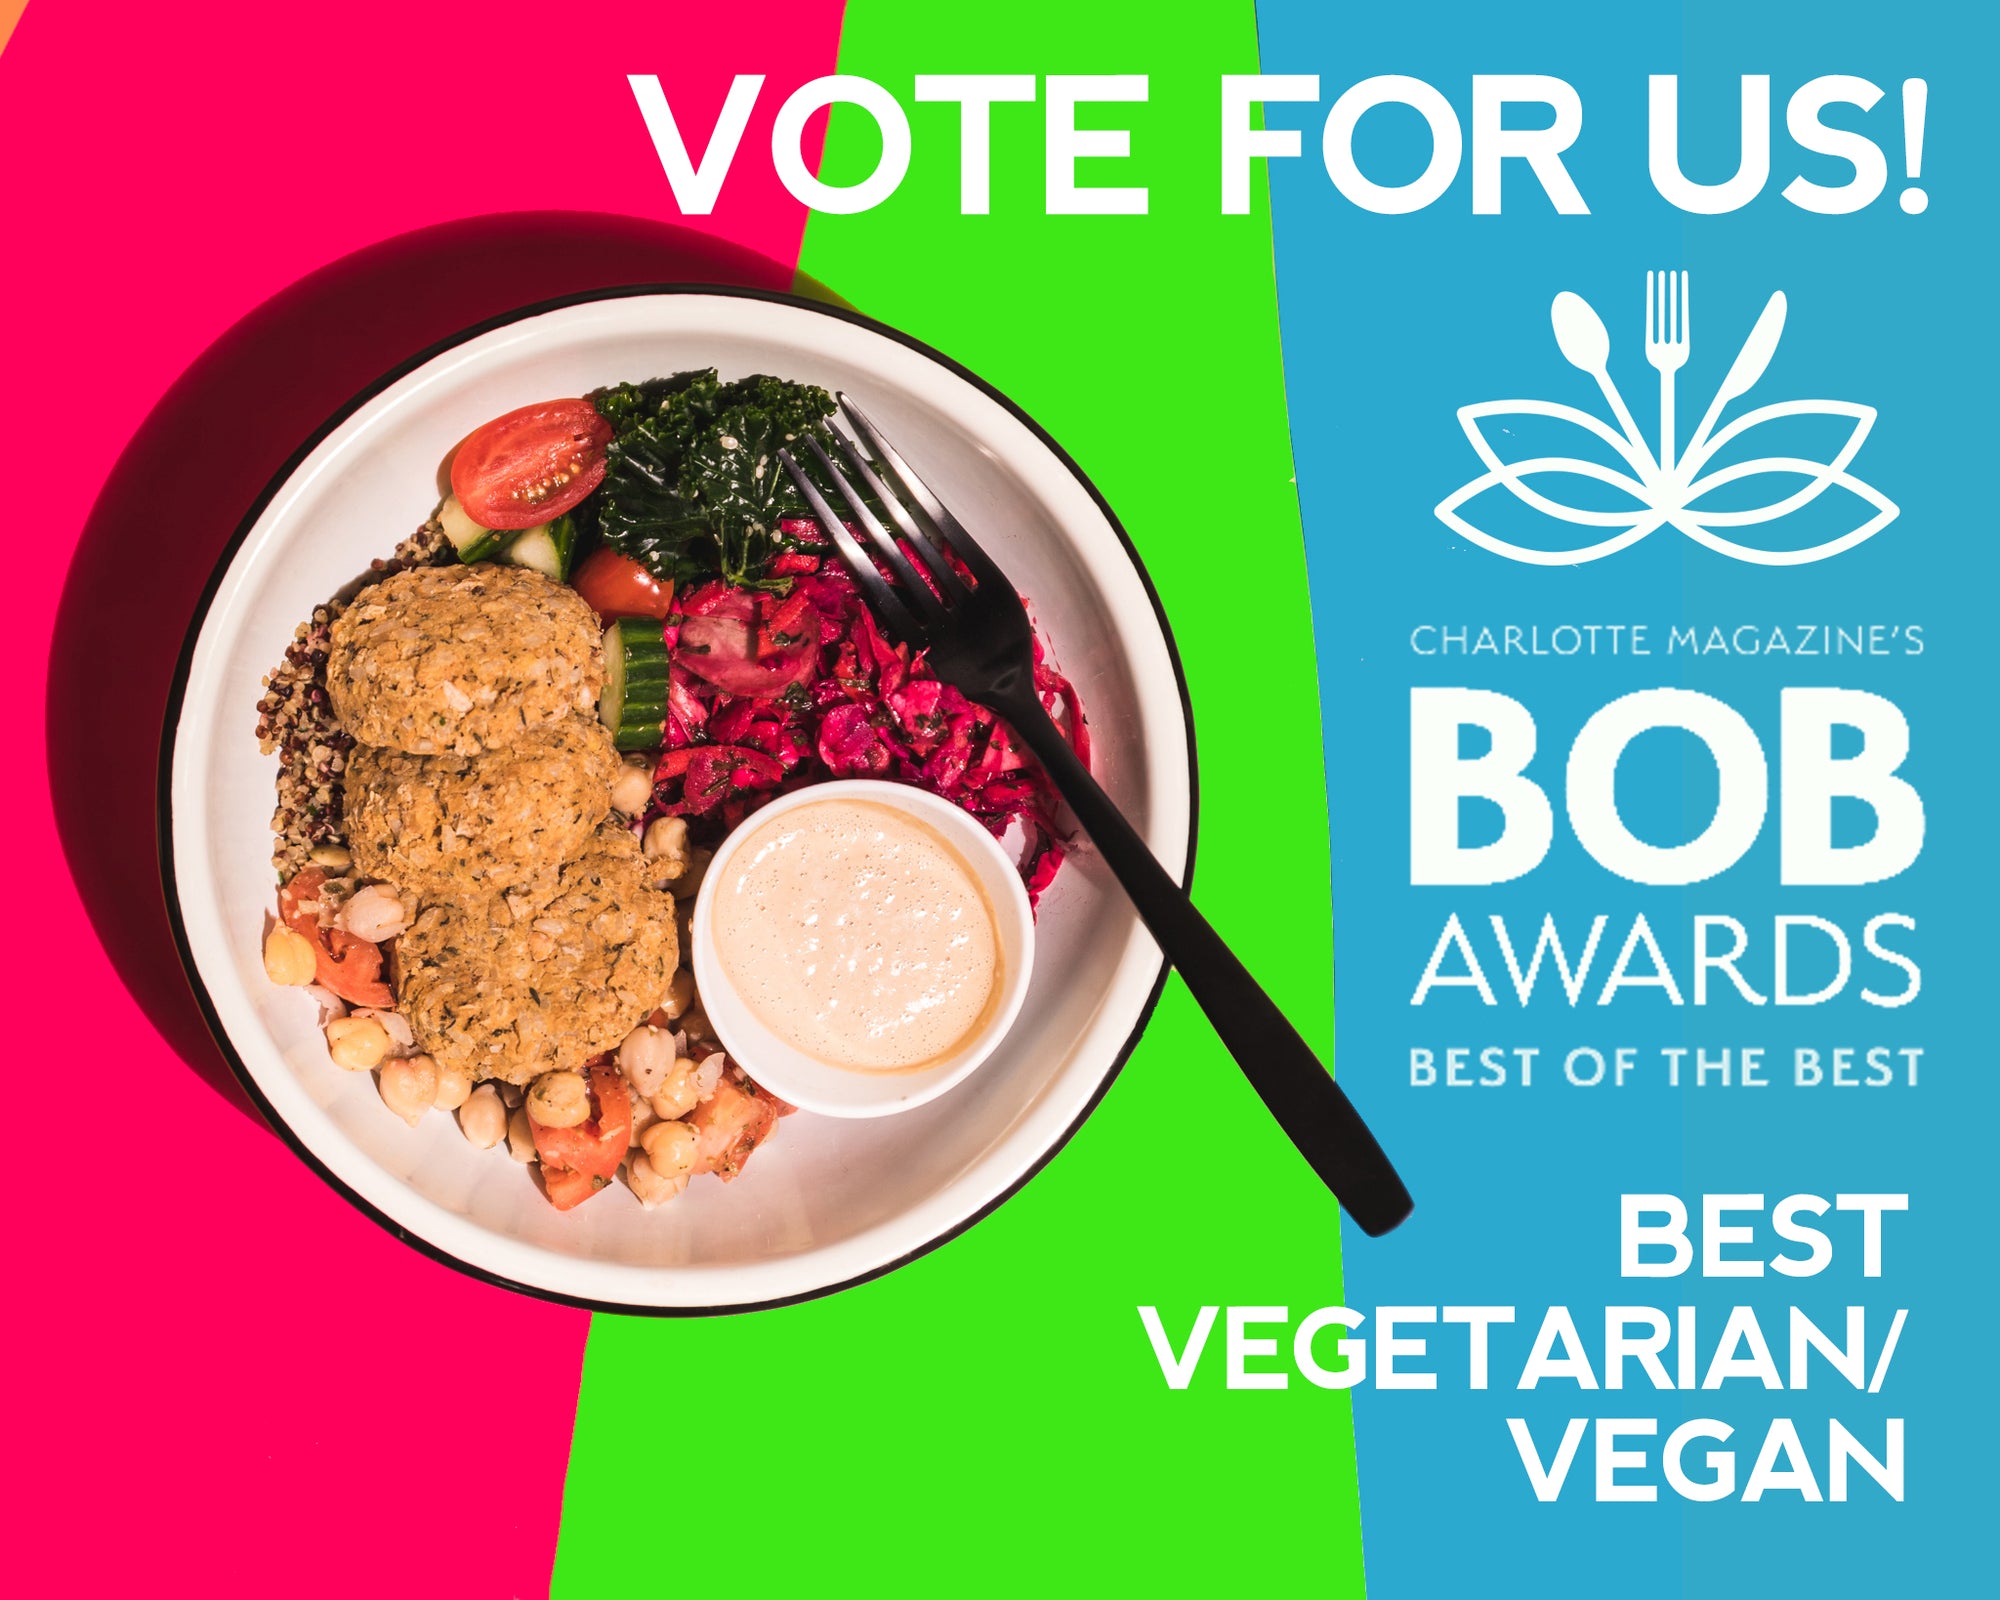 2020 BOB Awards - We Would Love Your Vote